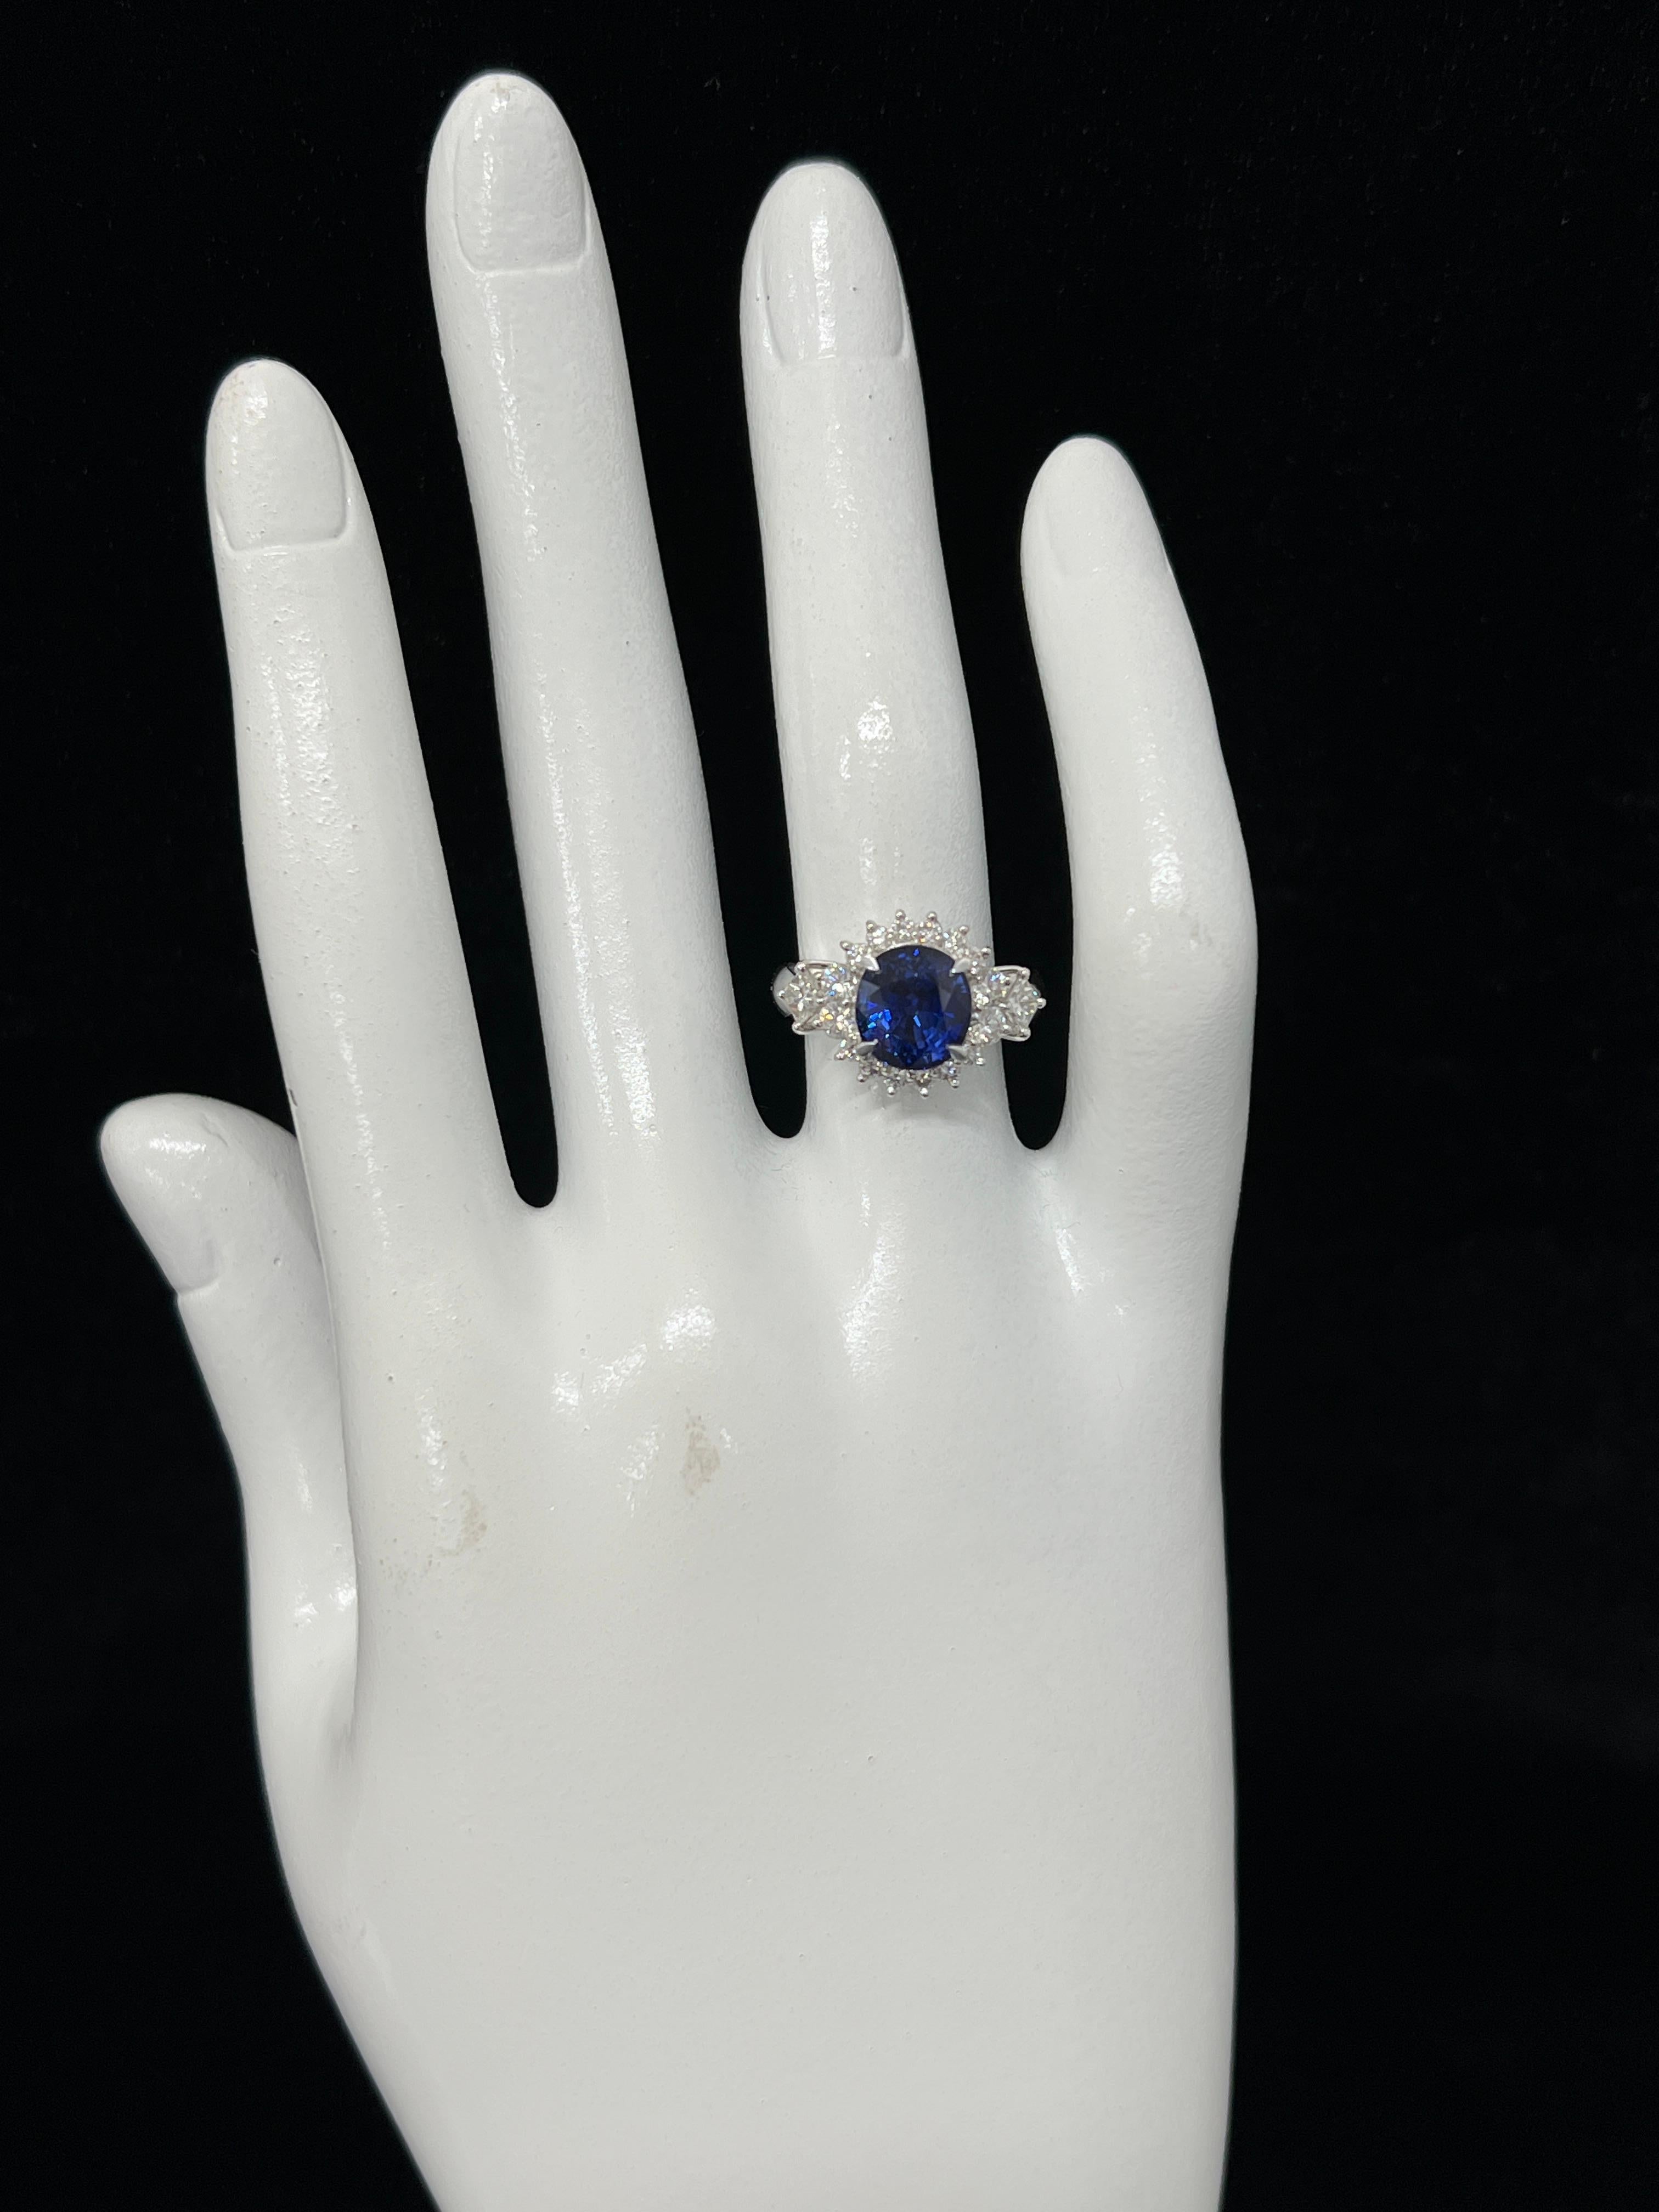 3.21 Carat Natural Royal Blue Color Sapphire and Diamond Ring Made in Platinum For Sale 1